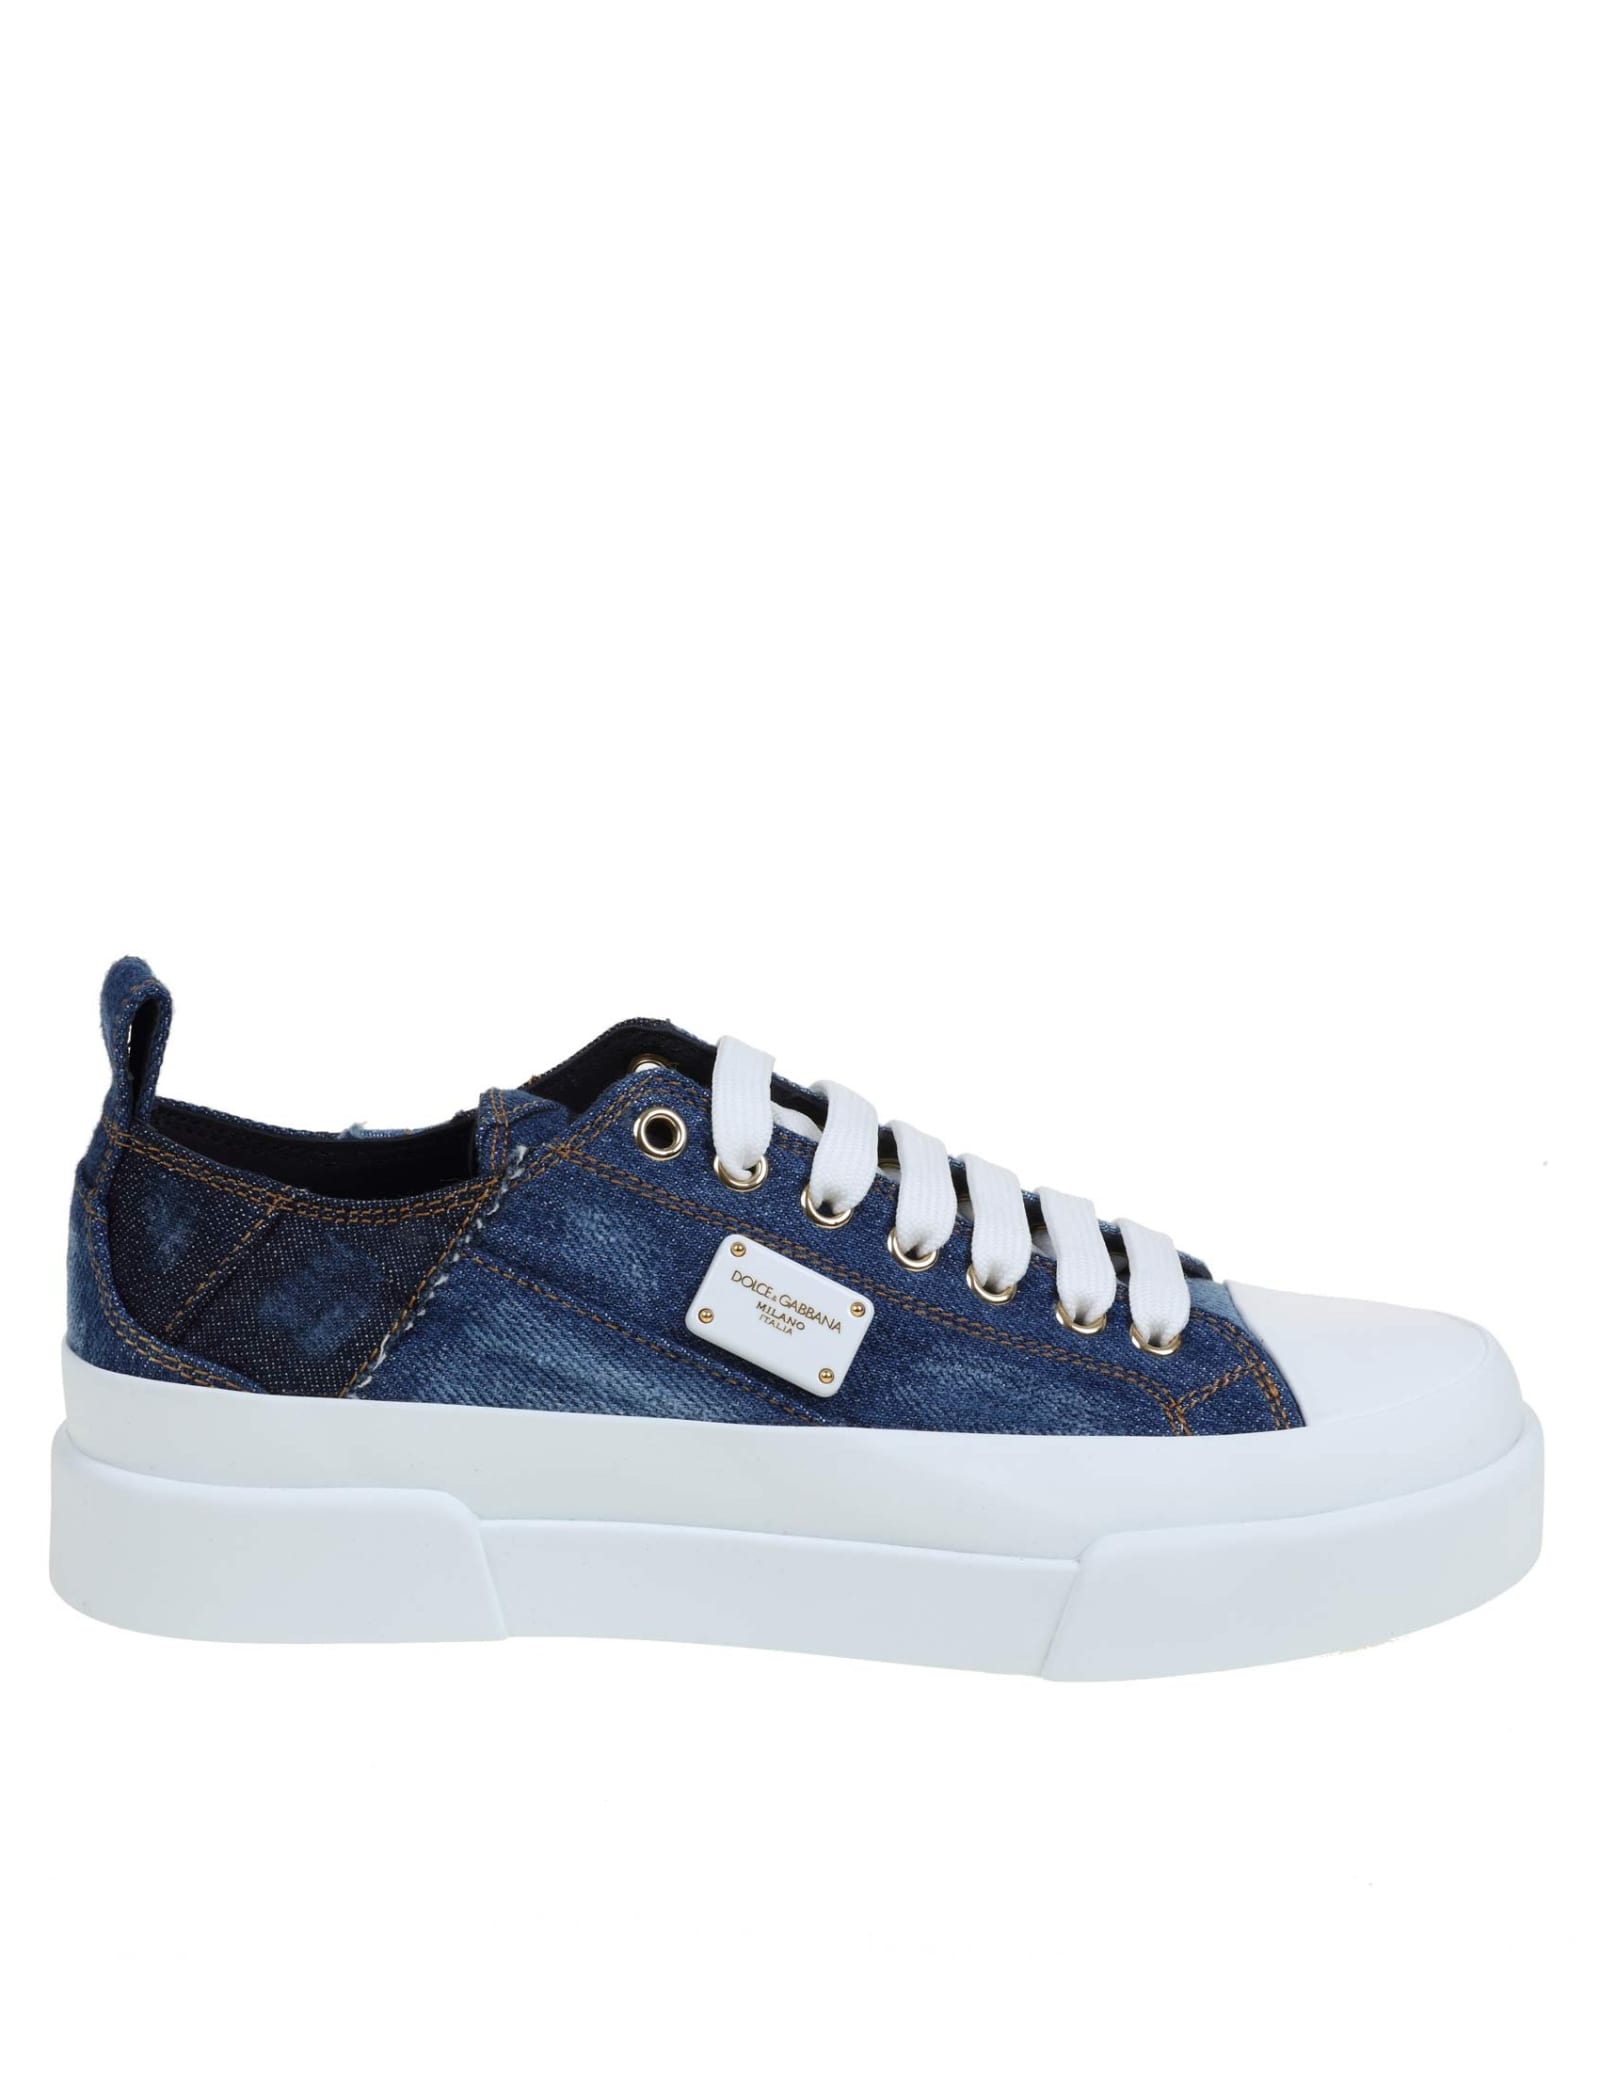 Dolce & Gabbana Portofino Light Sneakers In Patchwork Denim And Leather